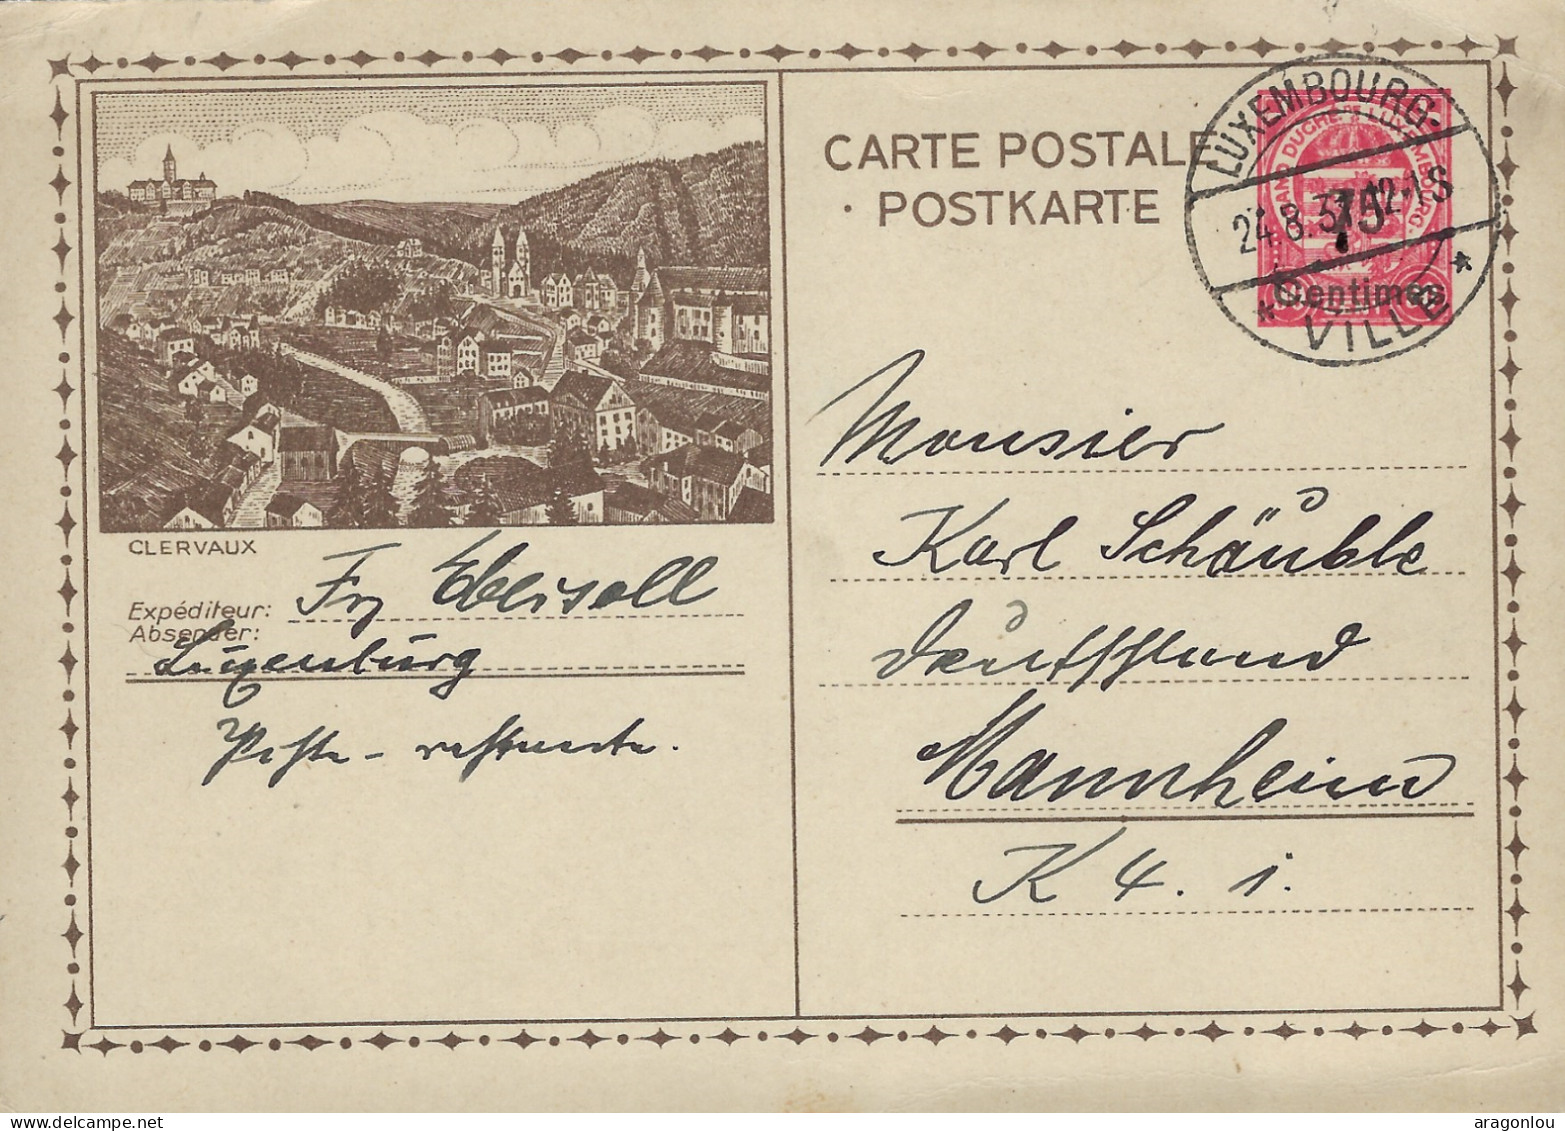 Luxembourg - Luxemburg - Carte - Postale   1937  Clervaux   Cachet  Luxembourg-Ville - Entiers Postaux